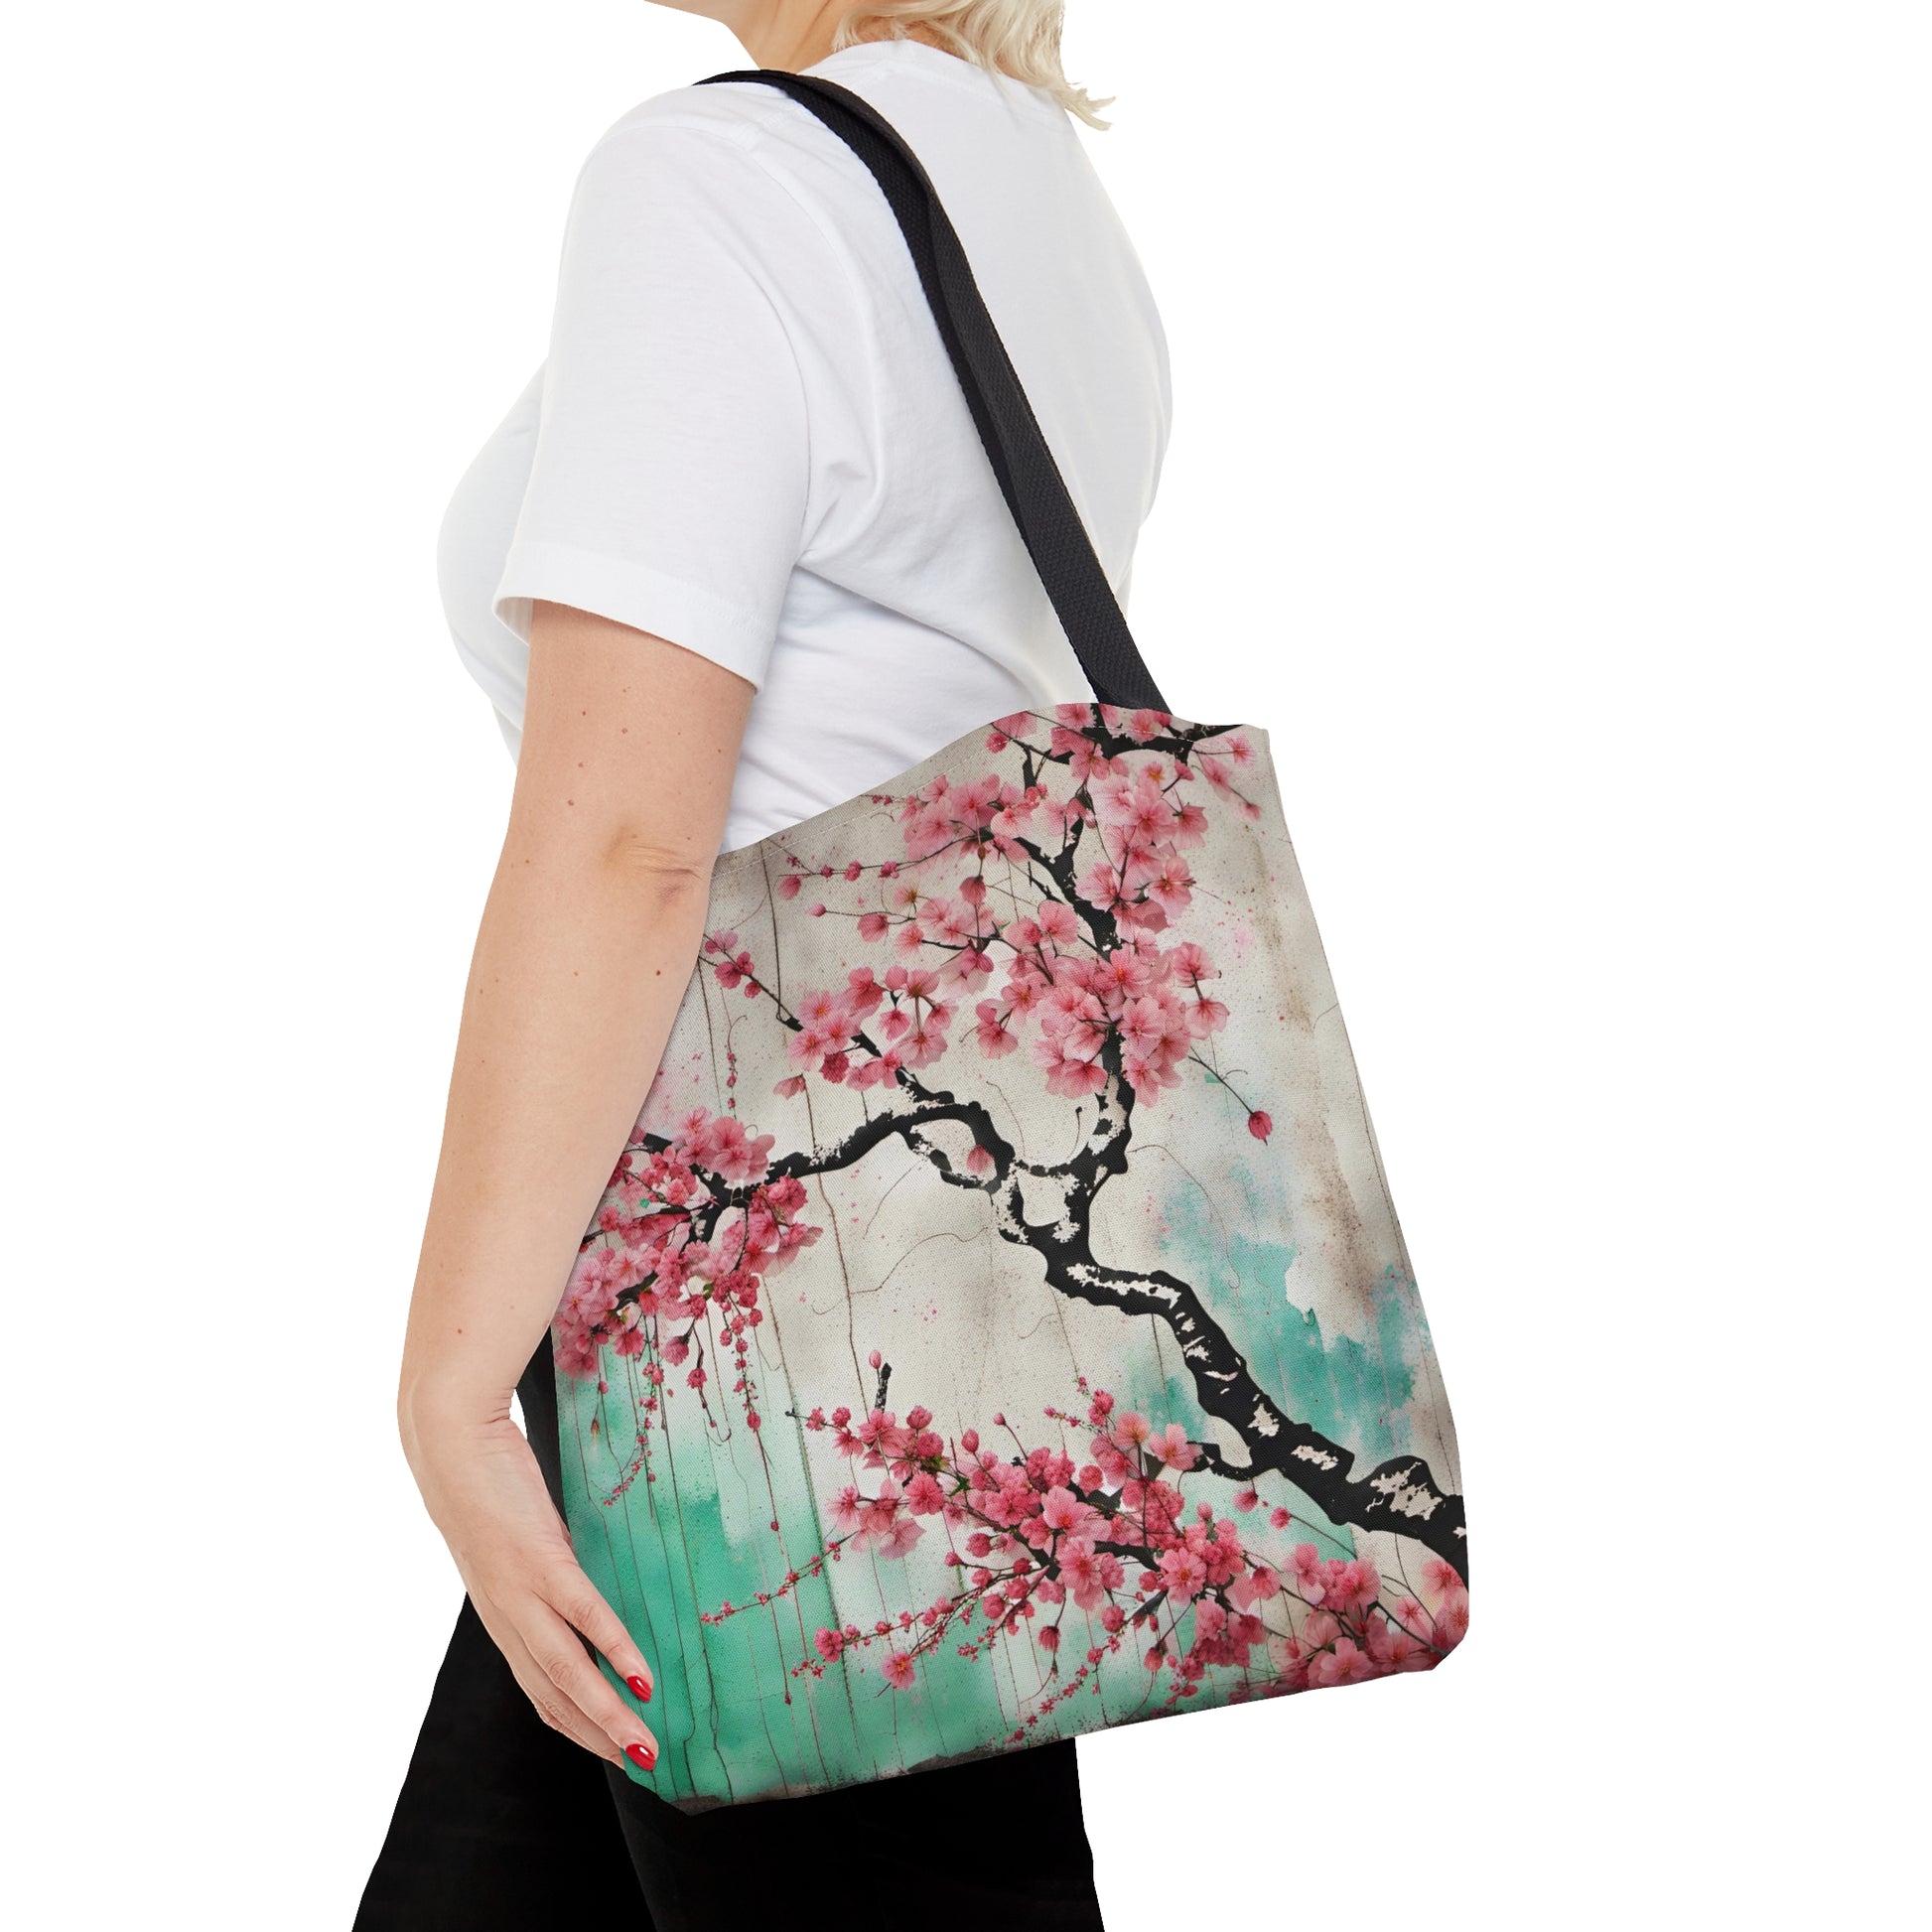 Floral Themed Bags and Travel Accessories - Street Style Cherry Blossoms Printed on Tote Bag medium